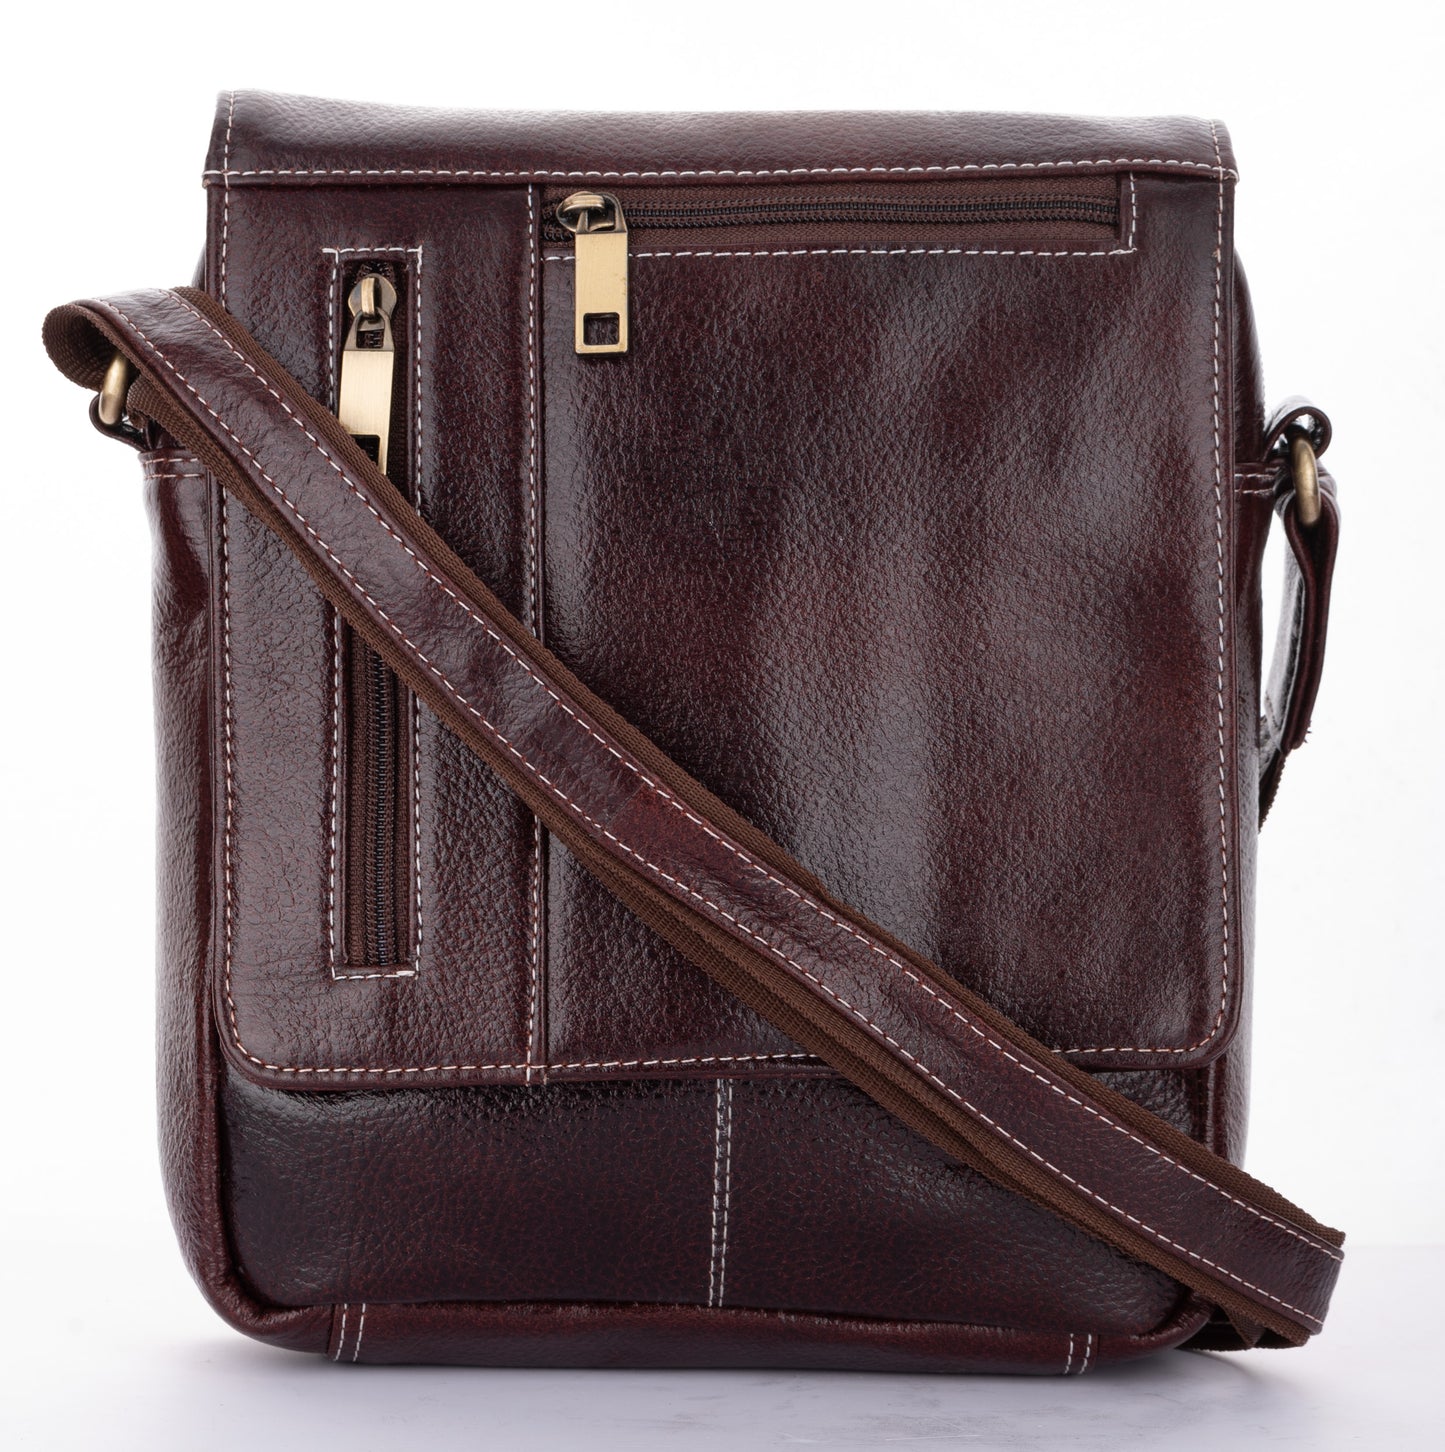 pure-leather-unisex-brown-cross-body-sling-messenger-bag-12-9-mb01